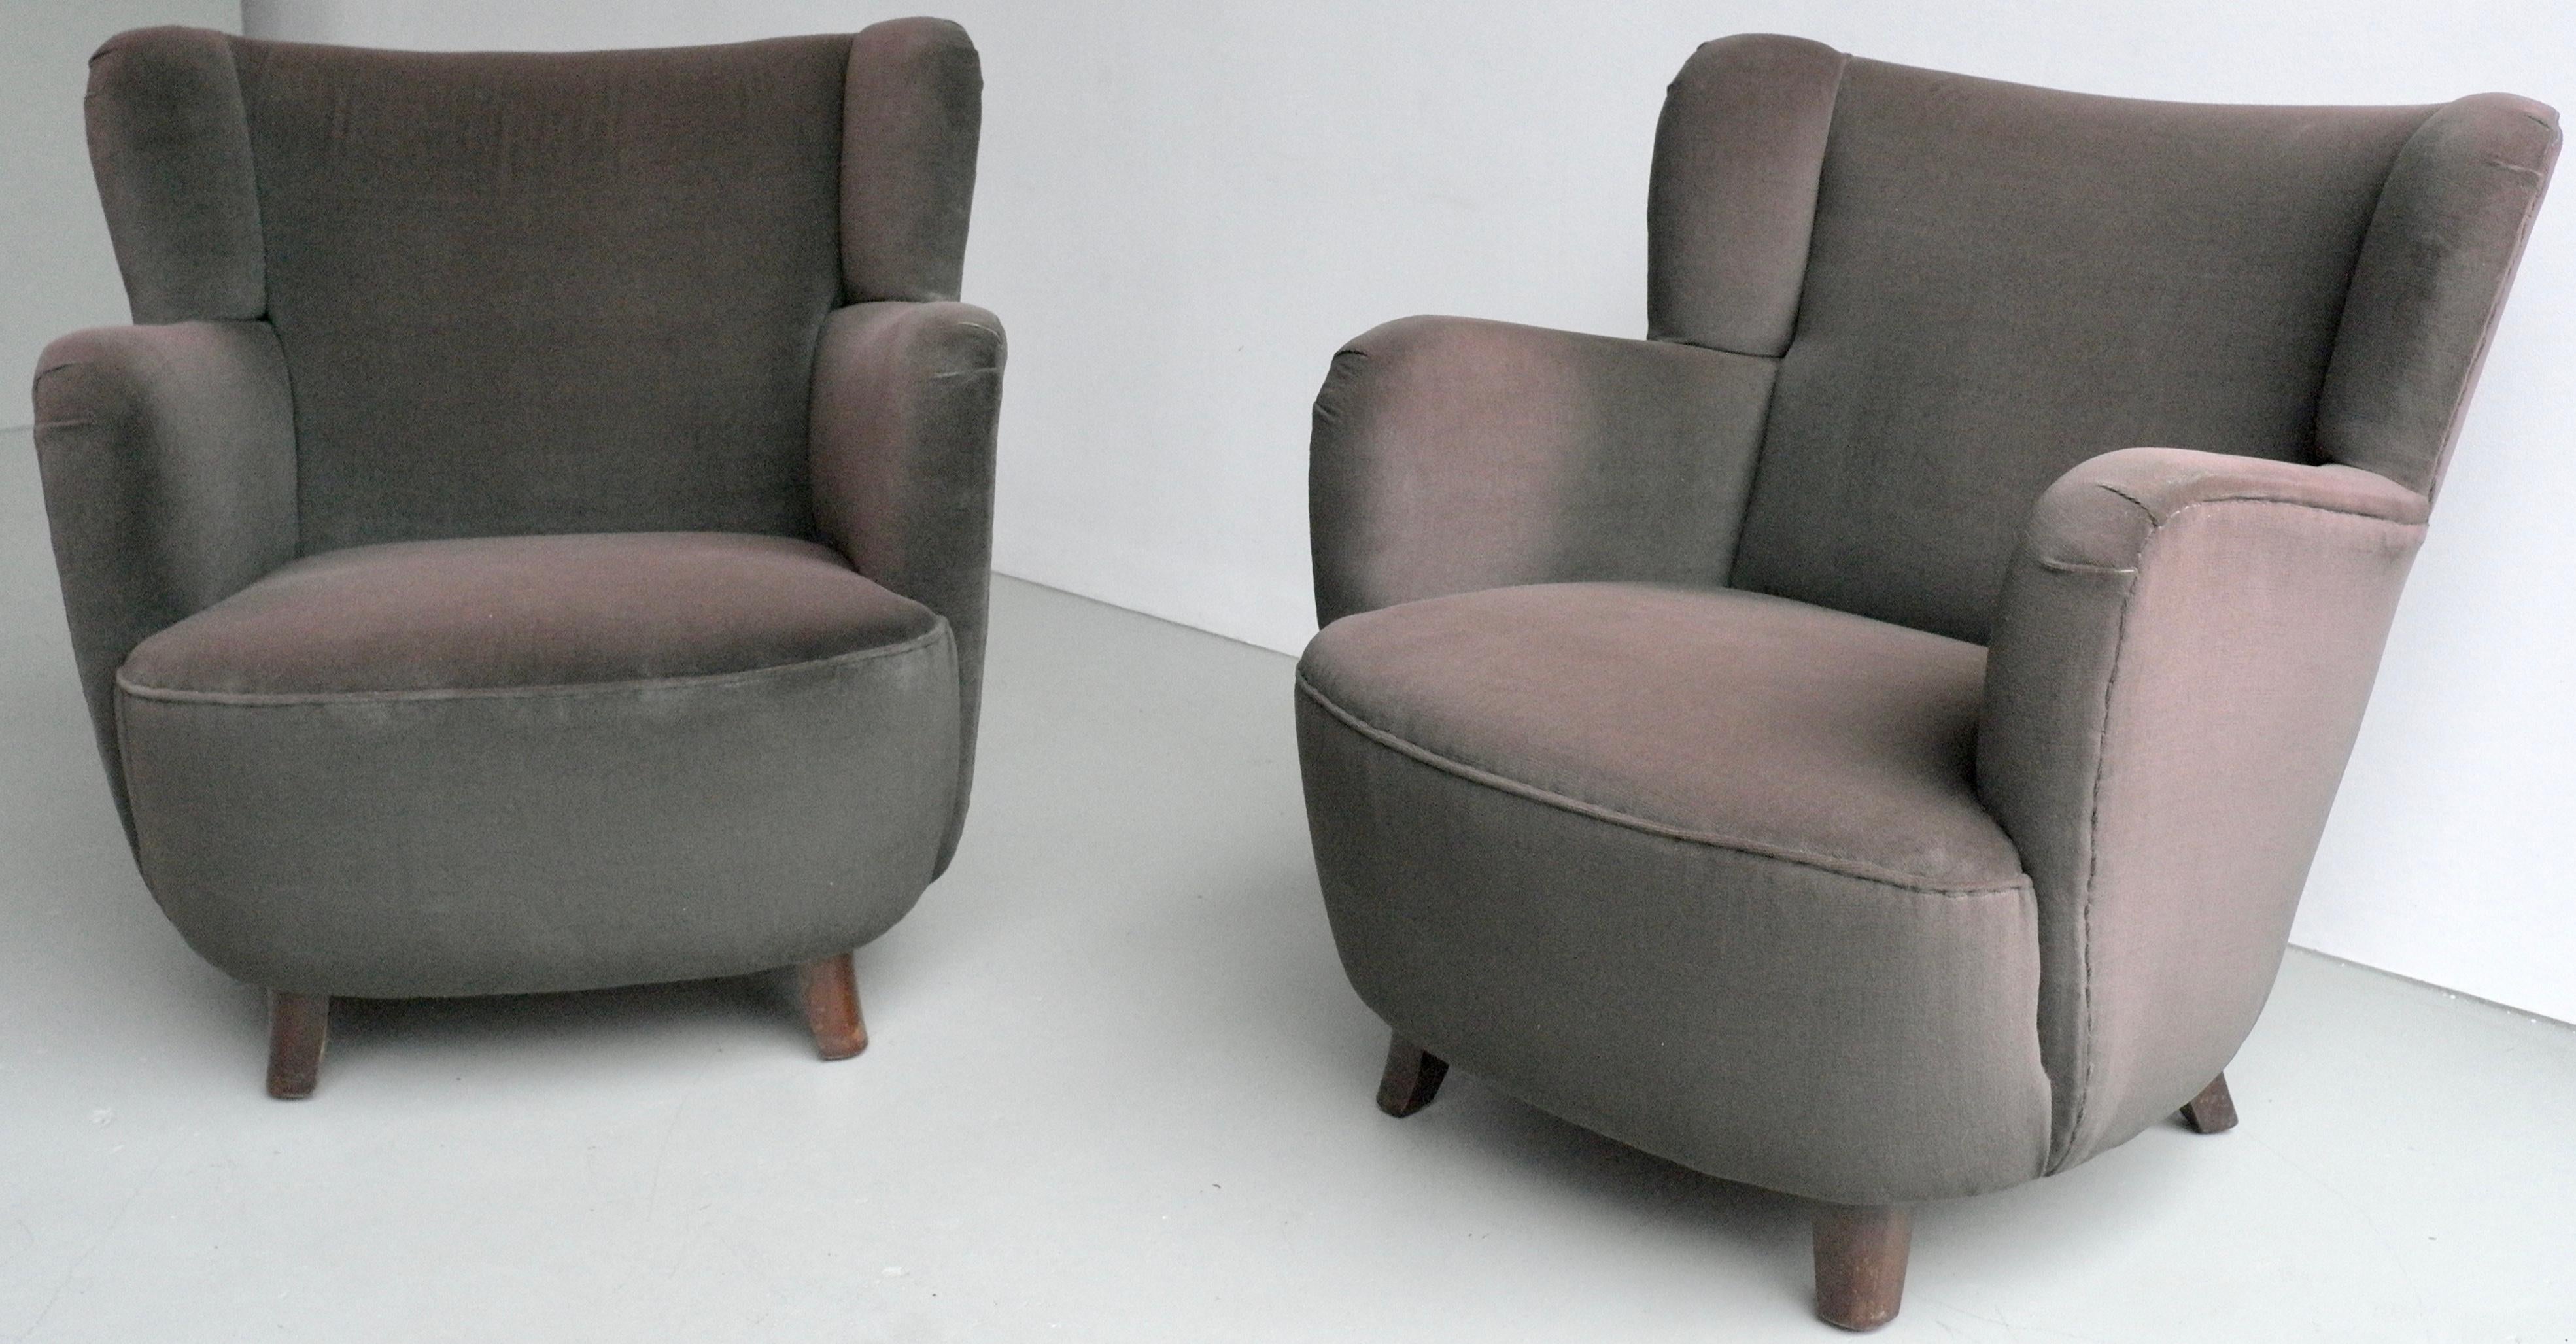 Pair of Mid-Century Modern Danish Lounge Chairs in Brown Eggplant Glow Velvet For Sale 7